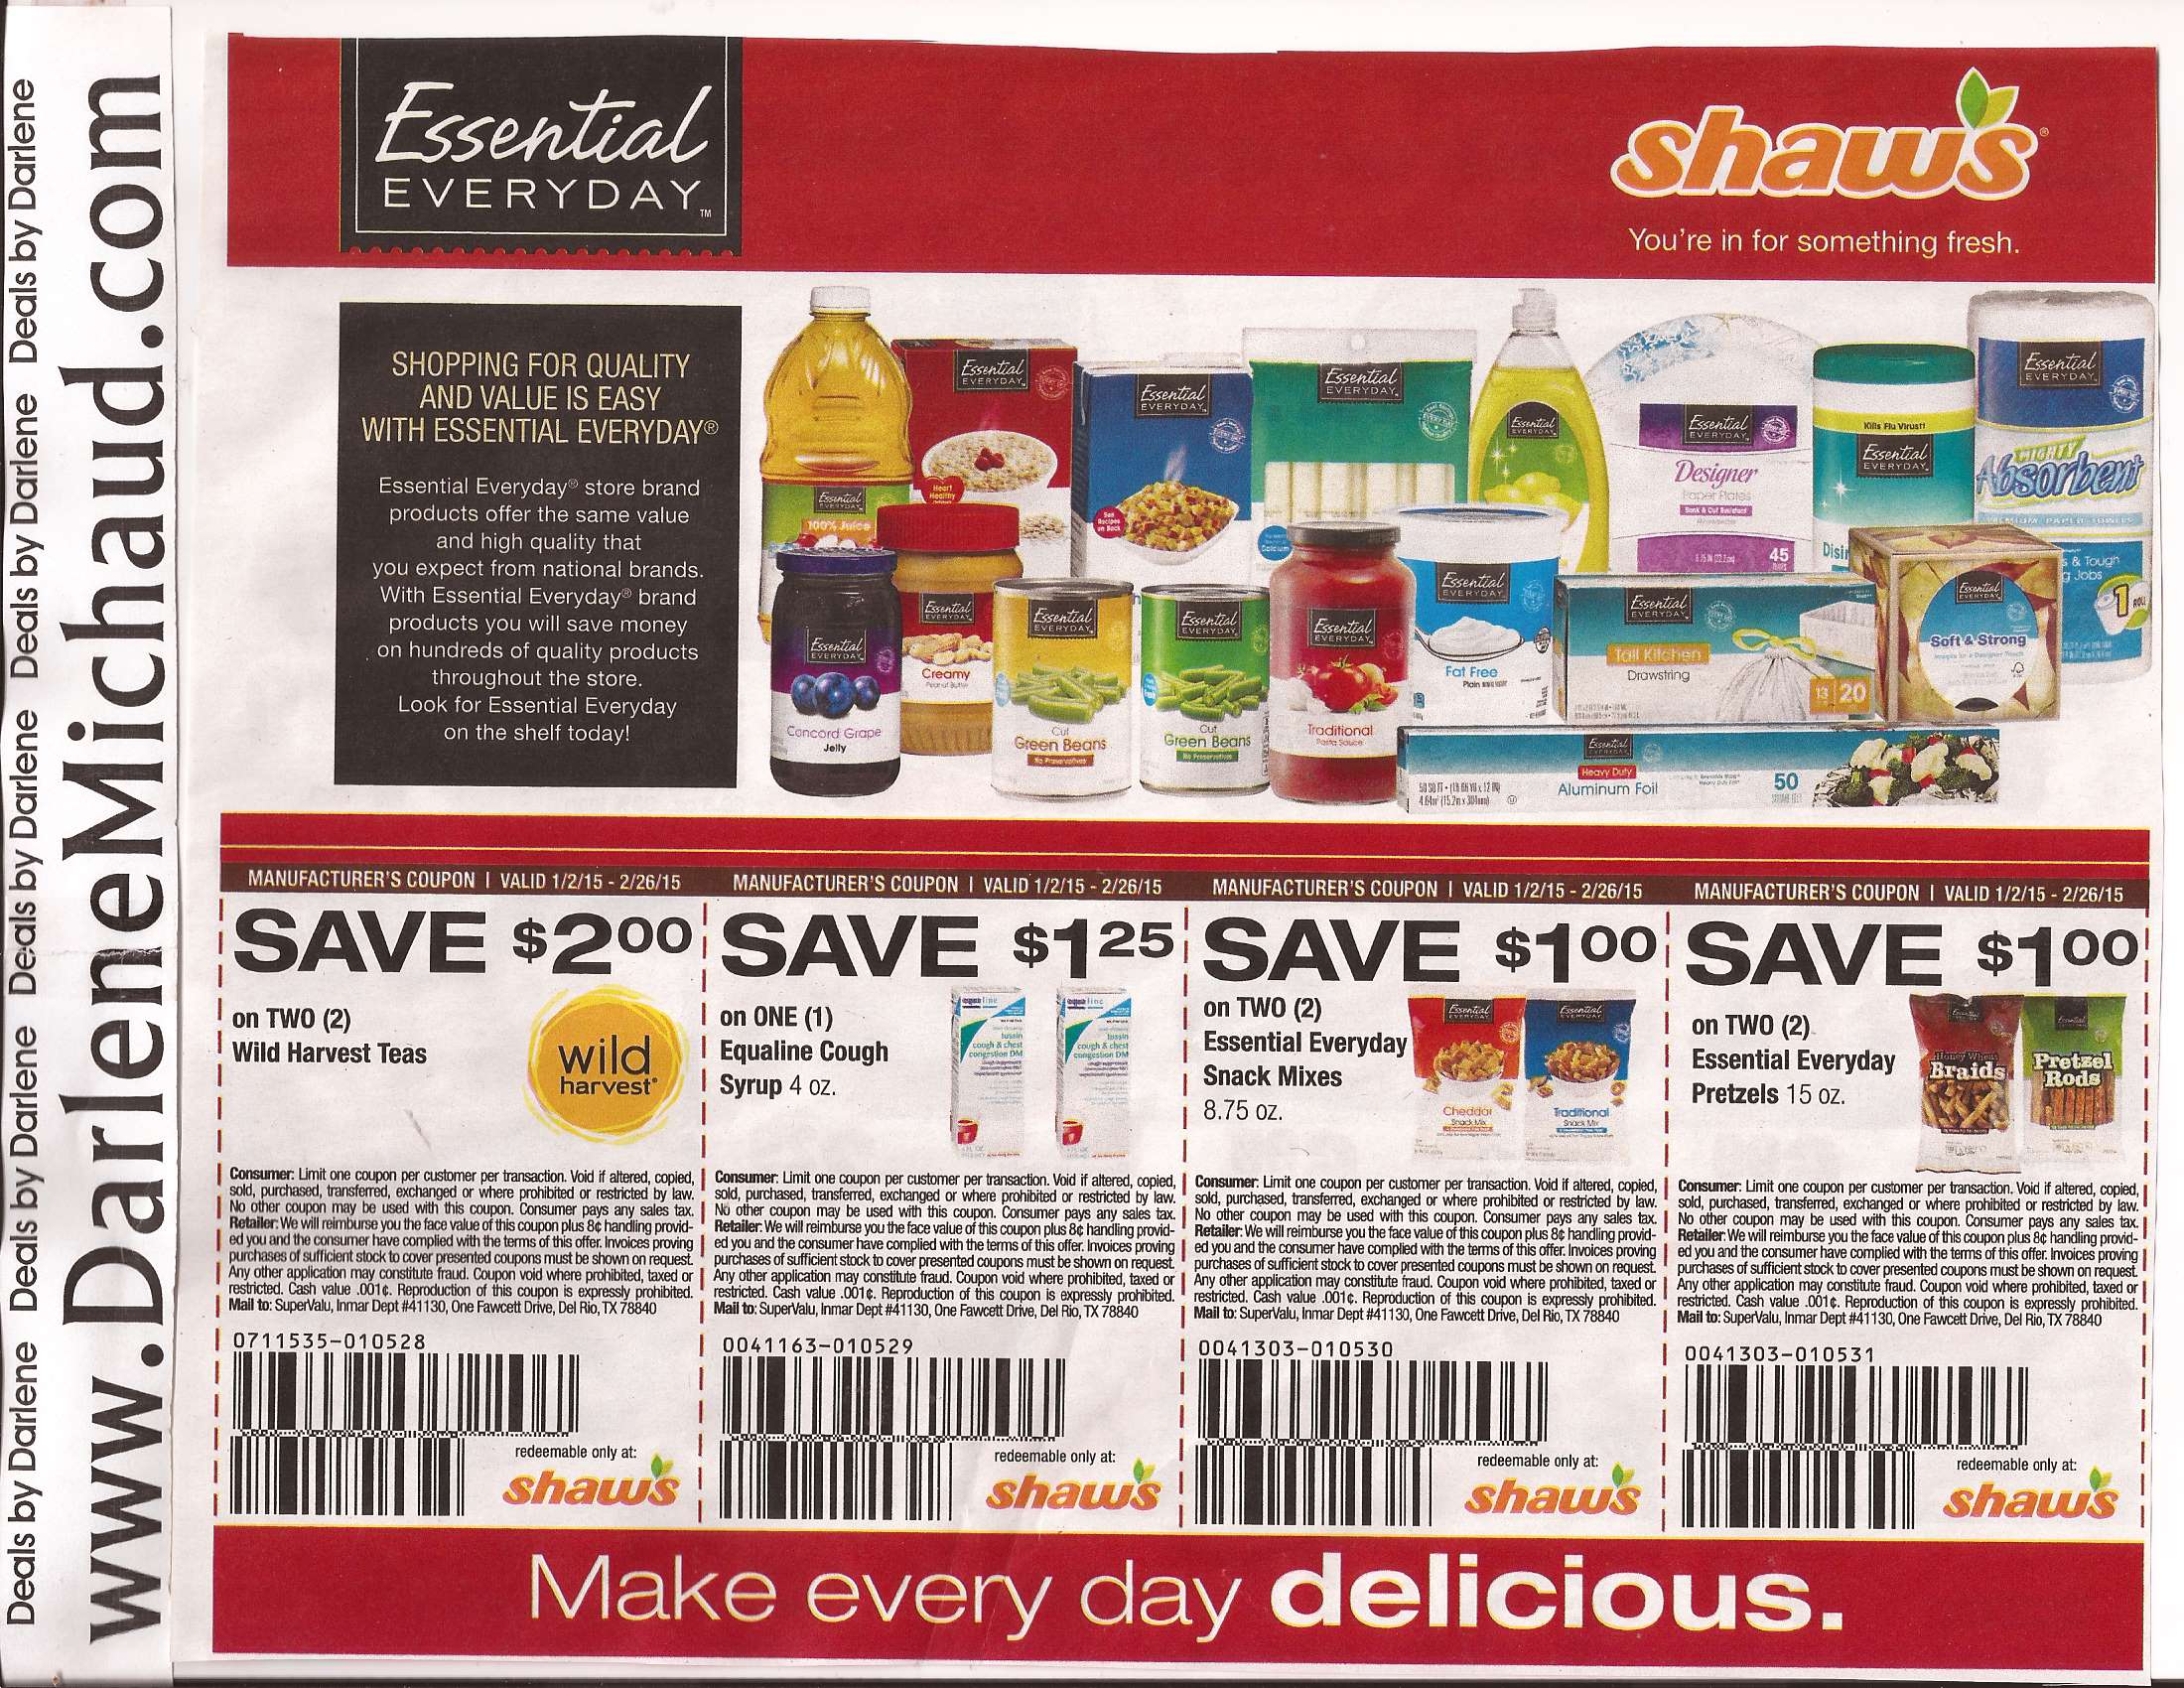 shaws-monthly-flyer-ad-scan-january-2-january-29-page-1a